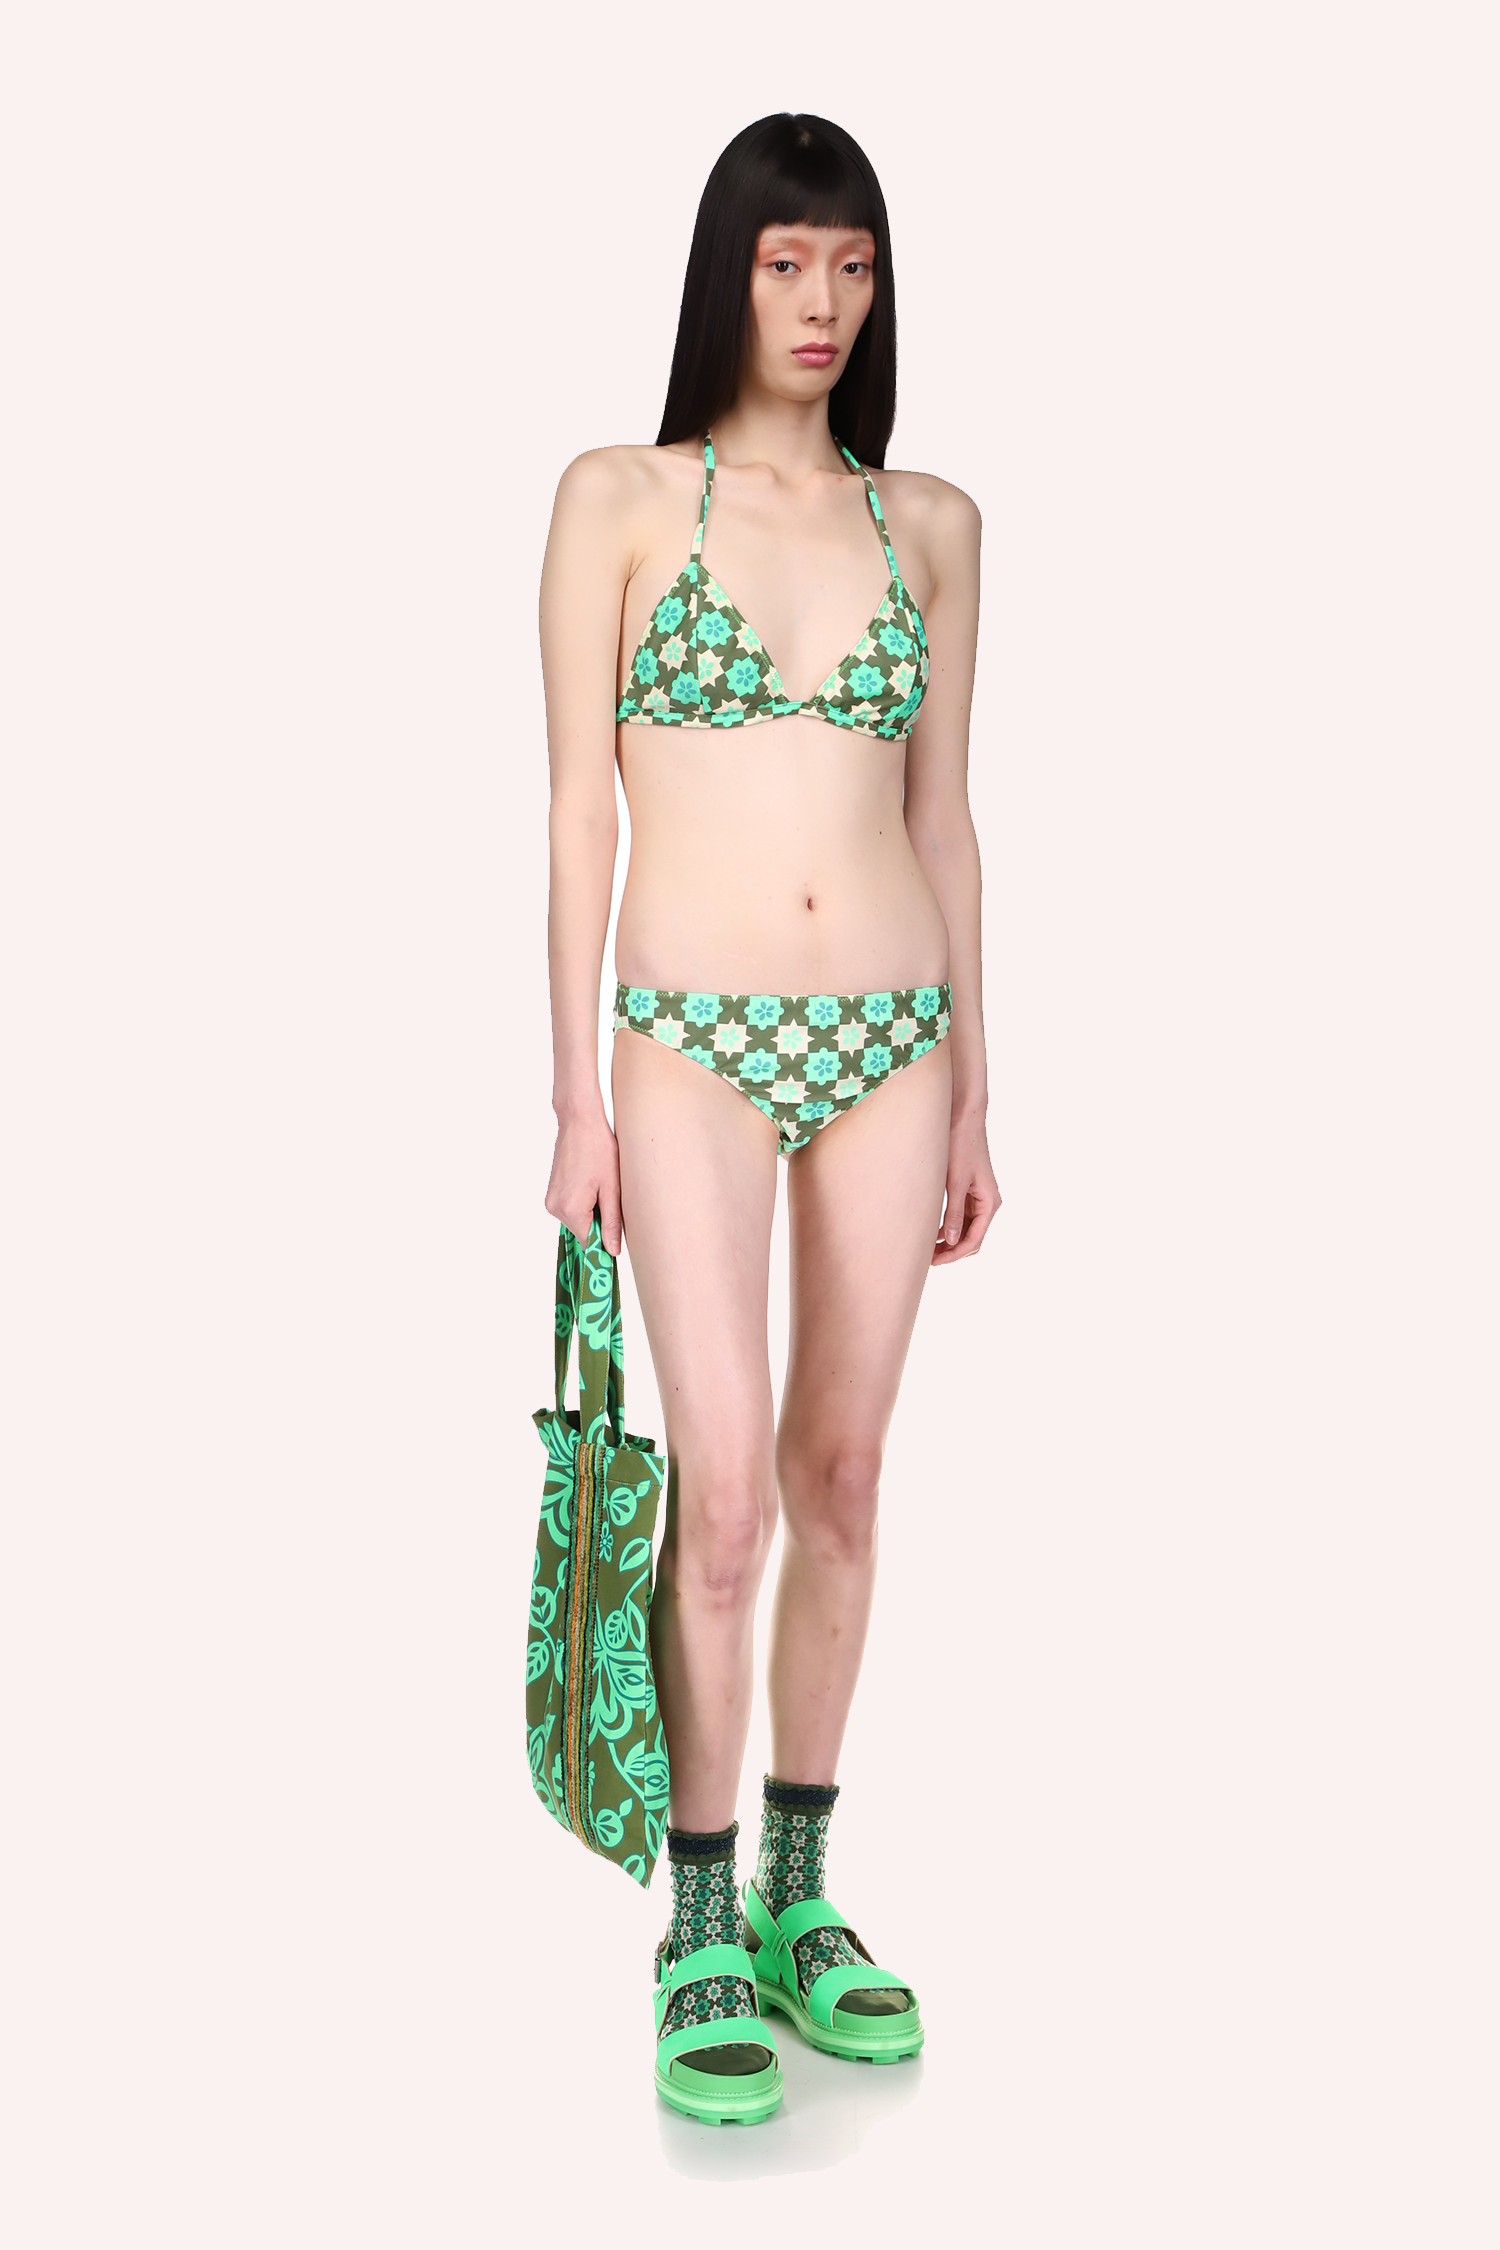 Utopian Gingham Triangle Bikini Set Glo Green perfect for the beach or being lazy in the sun